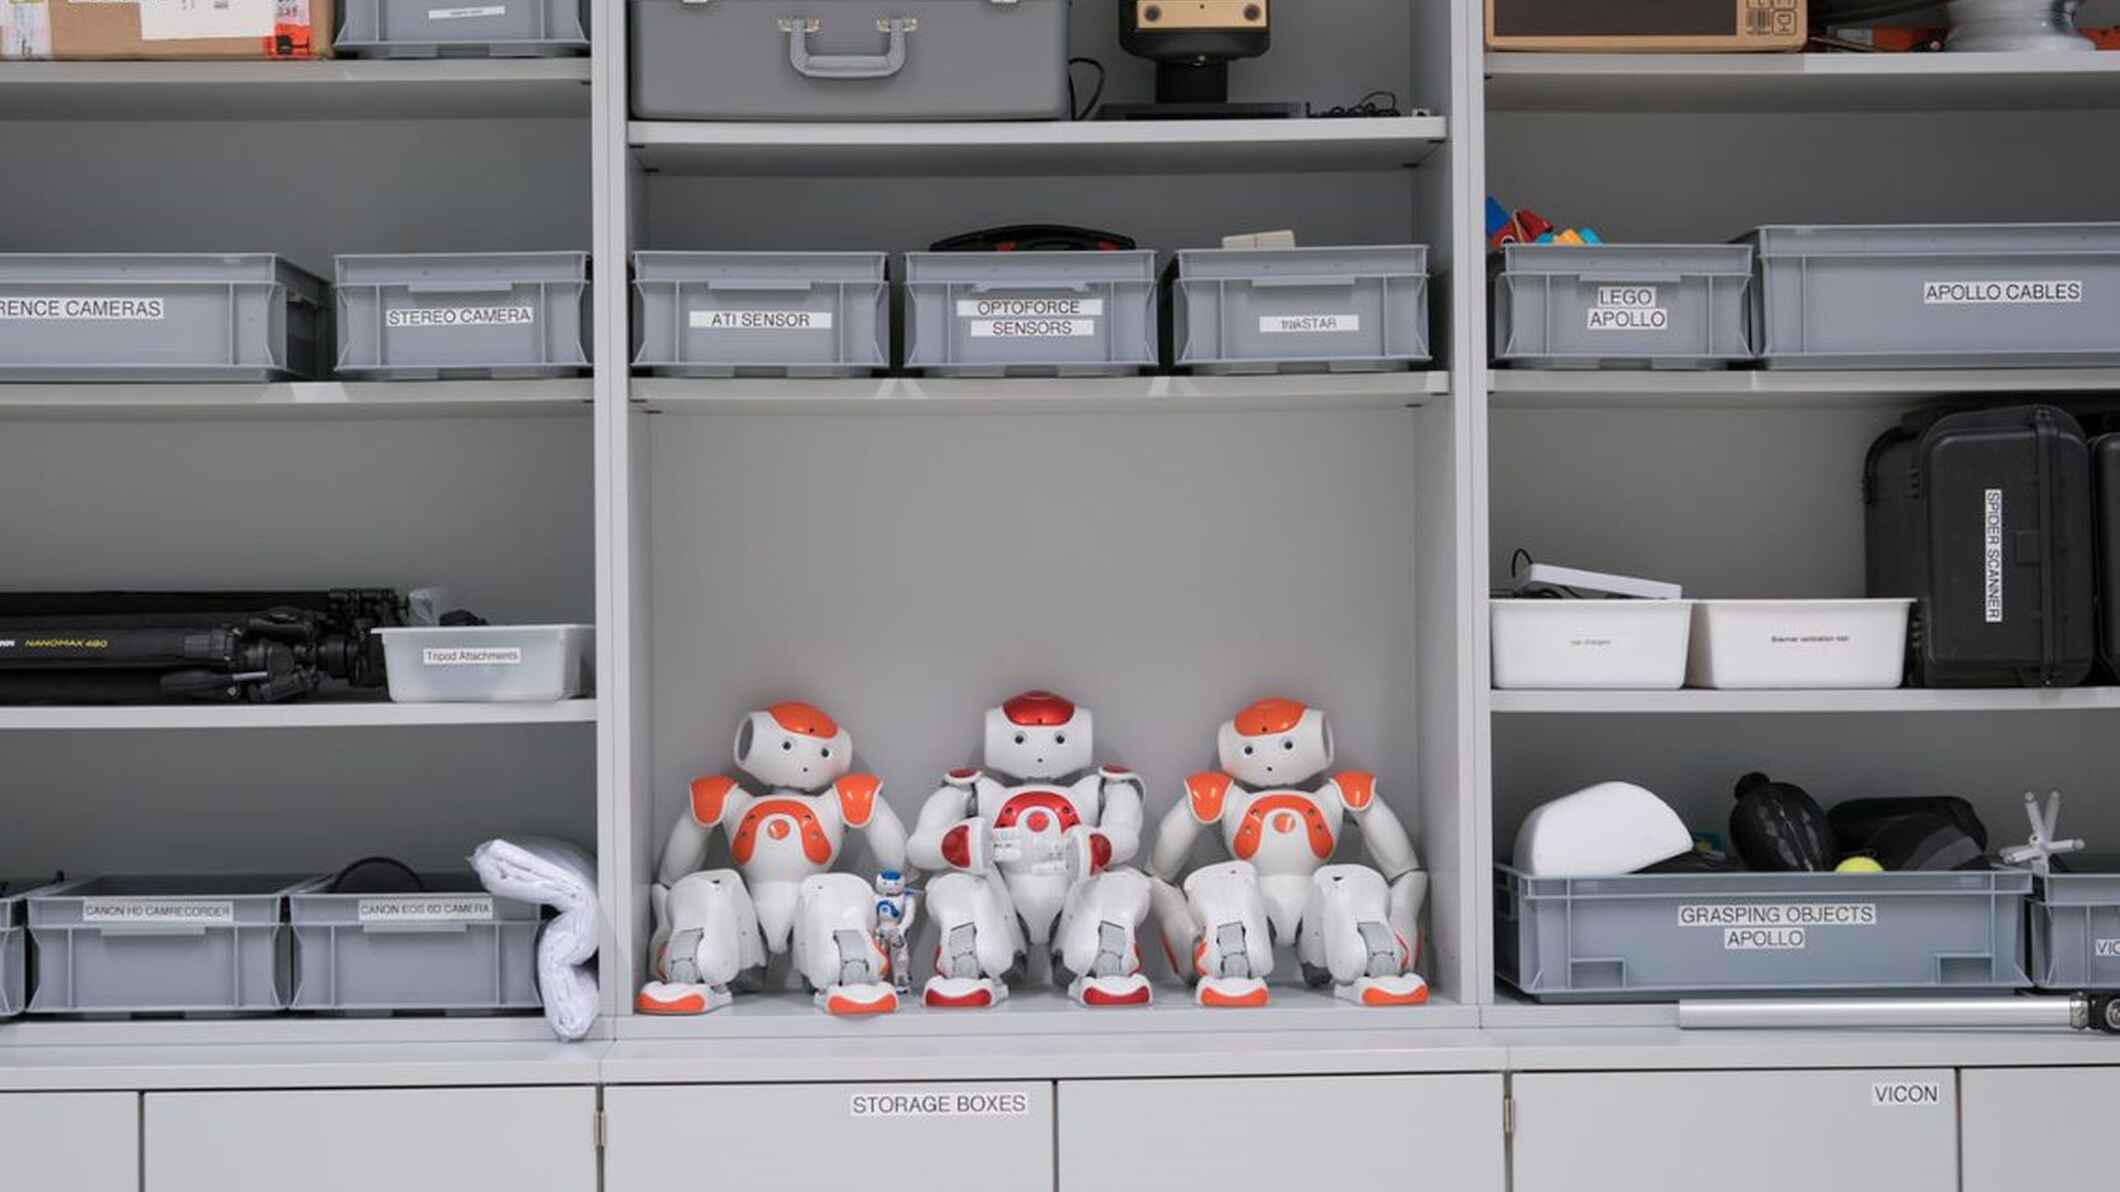 A humanoid robot named Nao is waiting in the spare parts cabinet of the robotics group for researchers to program it.